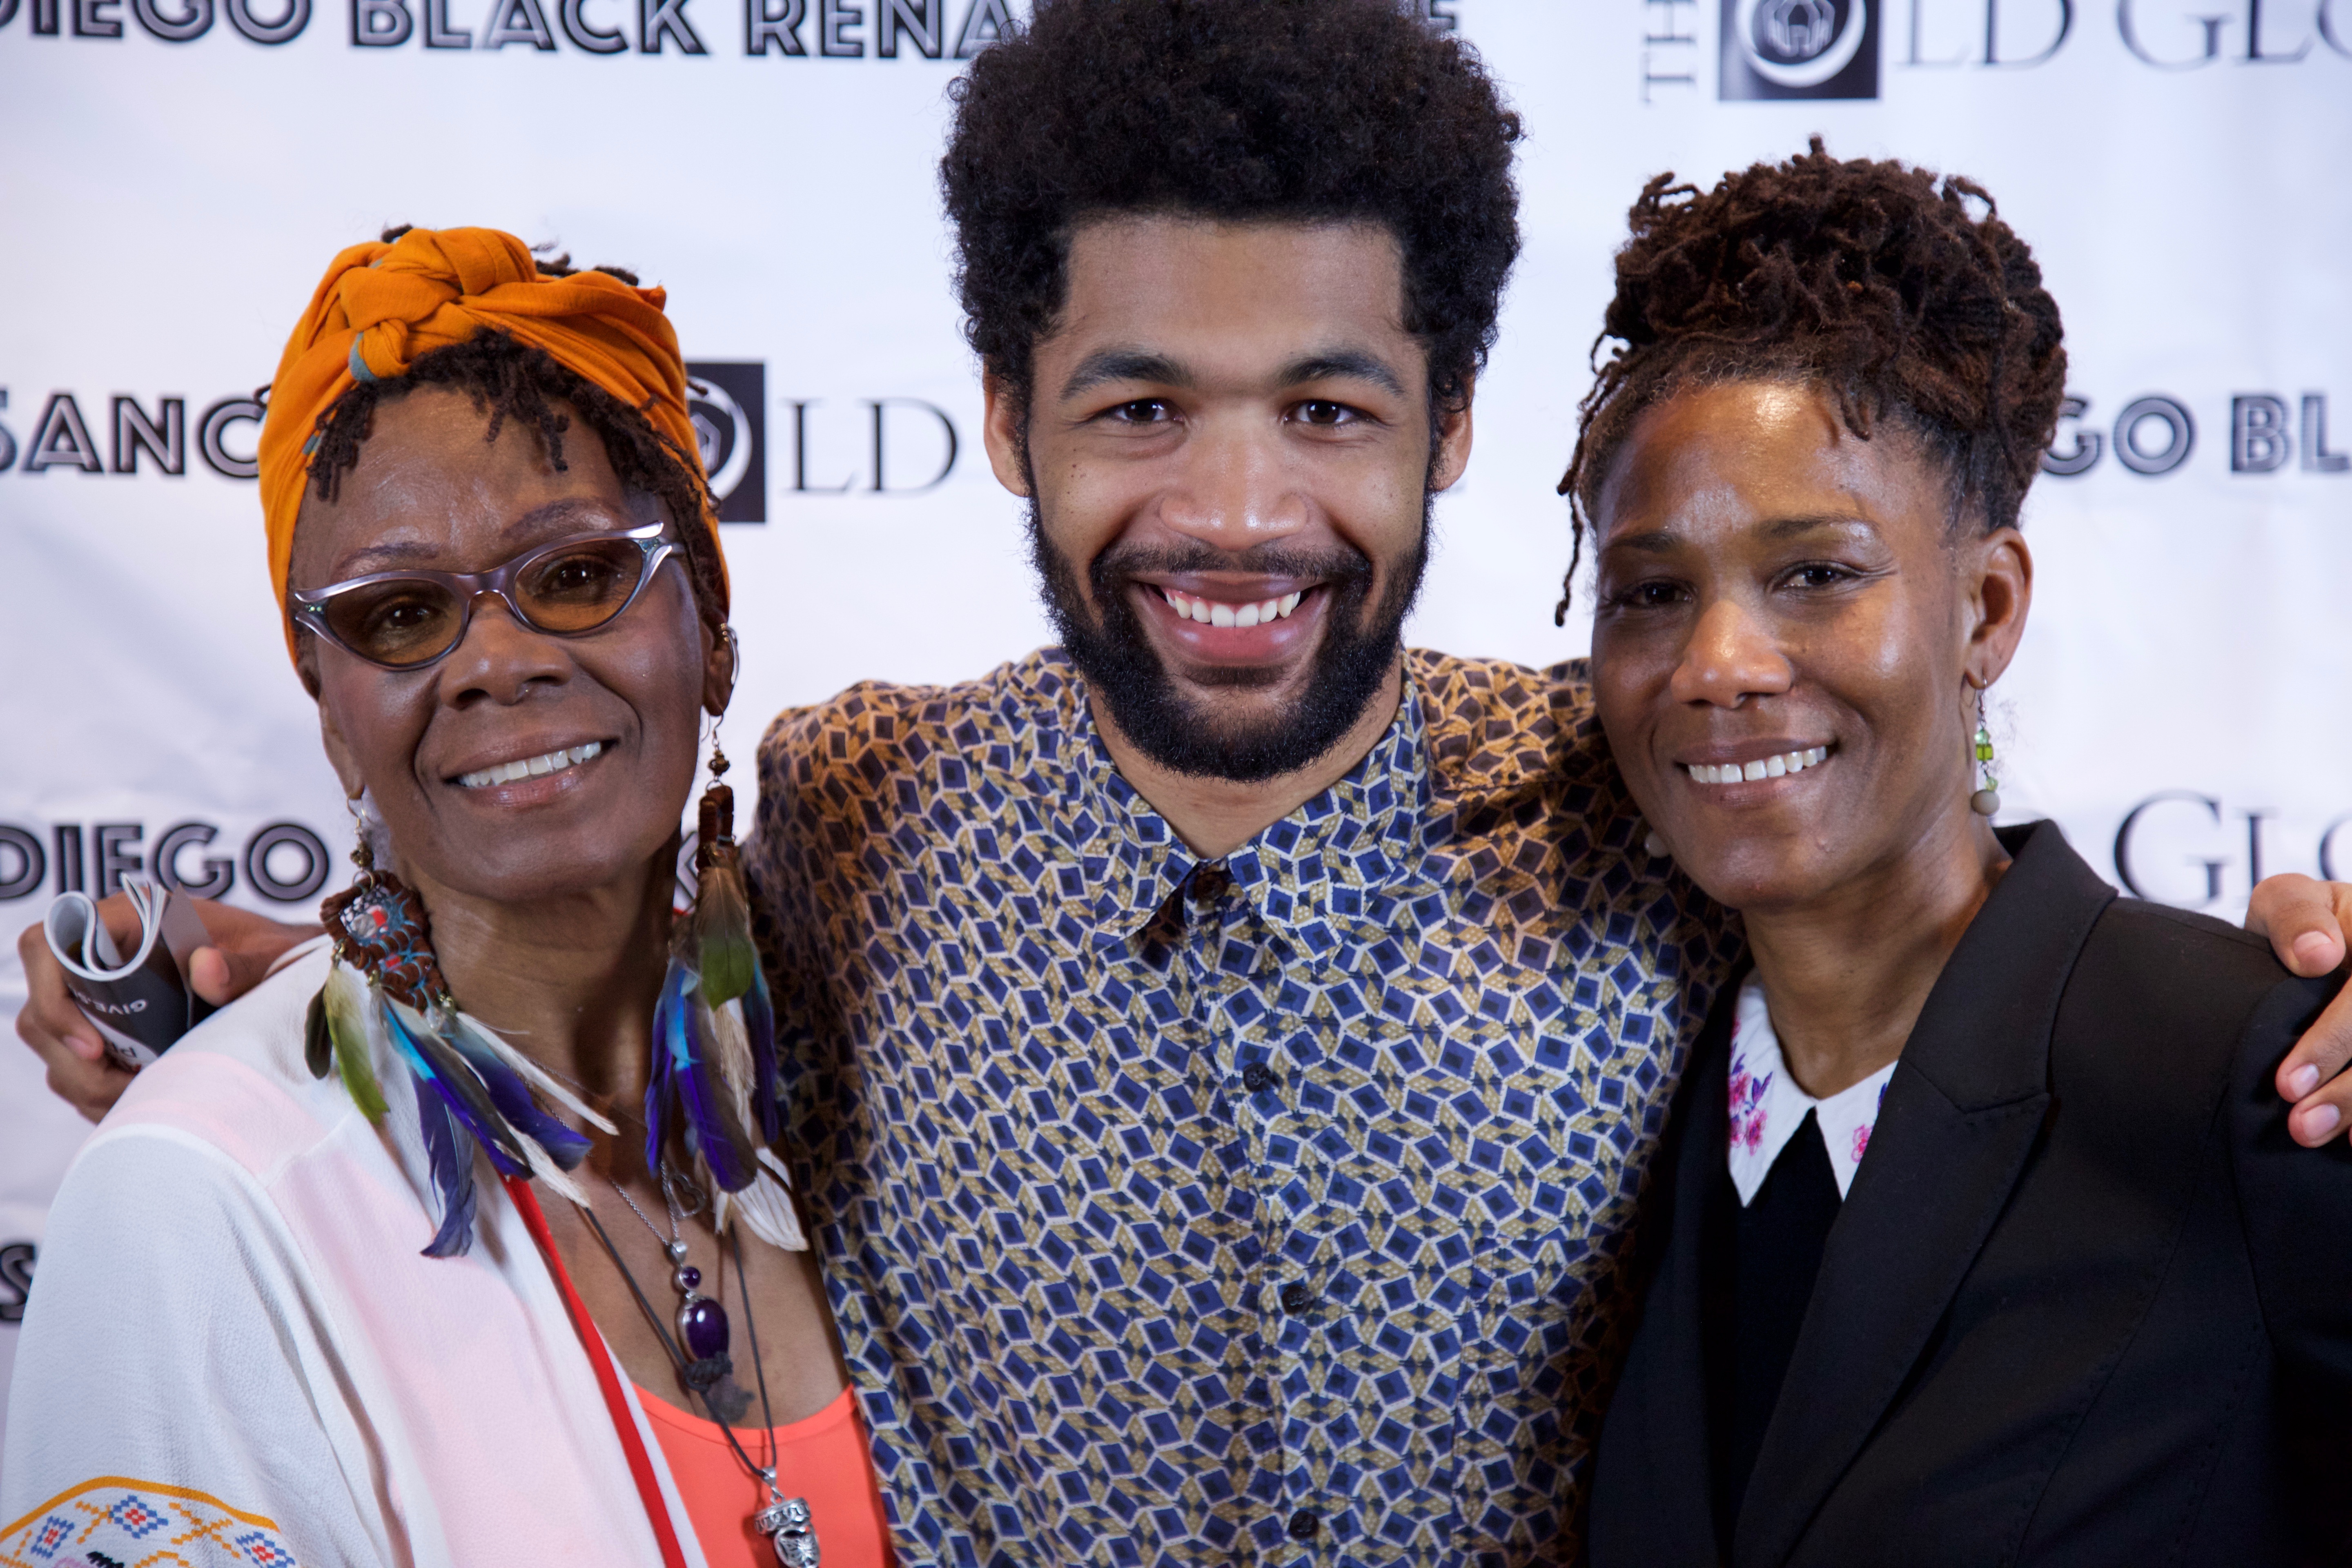 SD Black Renaissance Hosts Black Community Leaders at Old Globe for Colloquium on ...